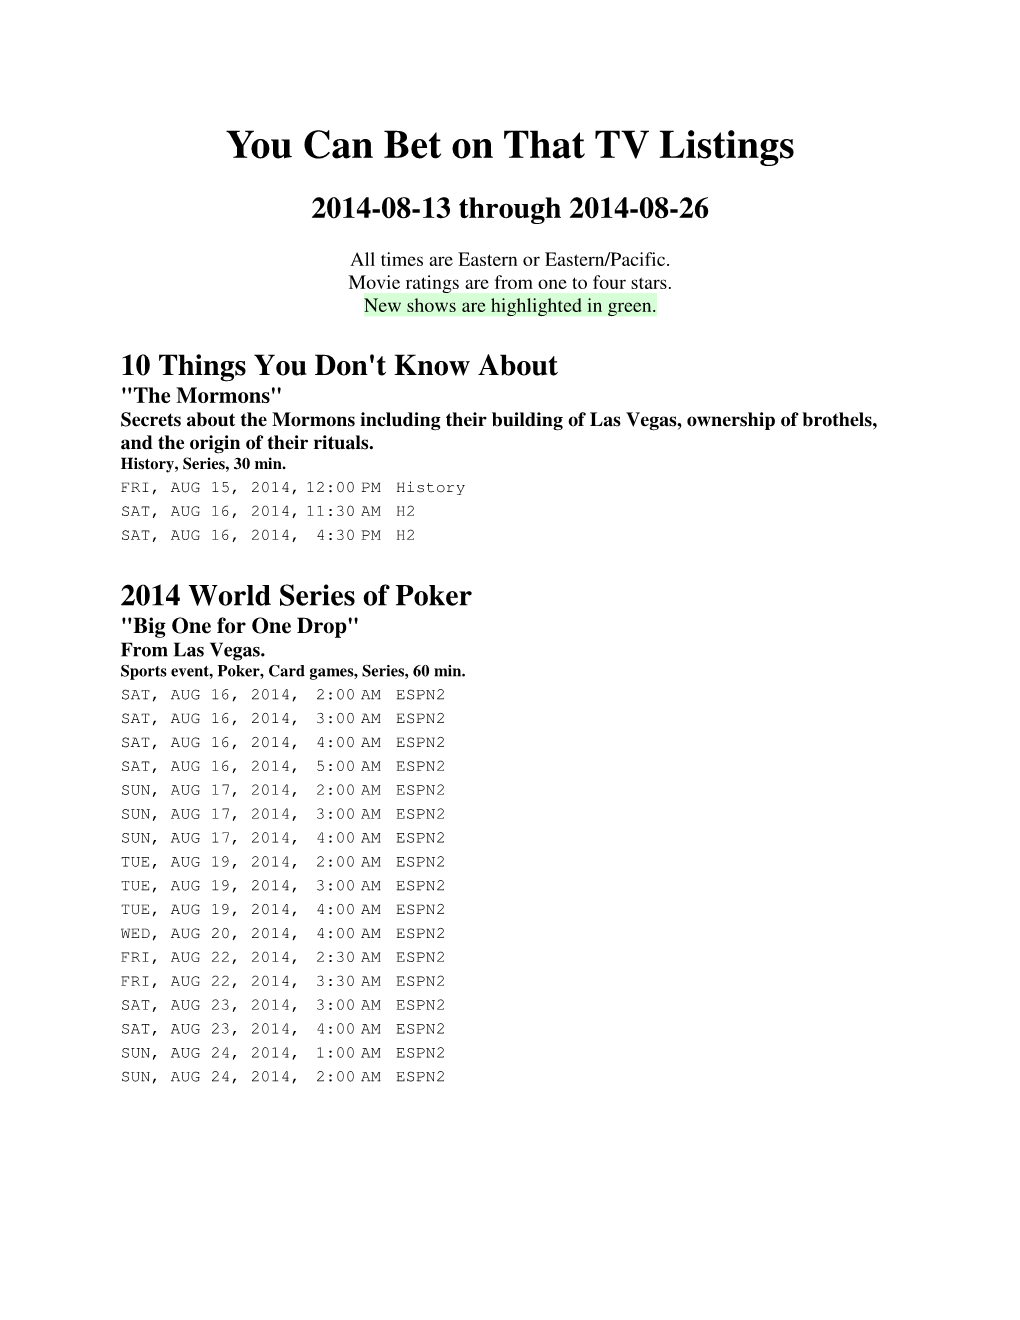 You Can Bet on That TV Listings 2014-08-13 Through 2014-08-26